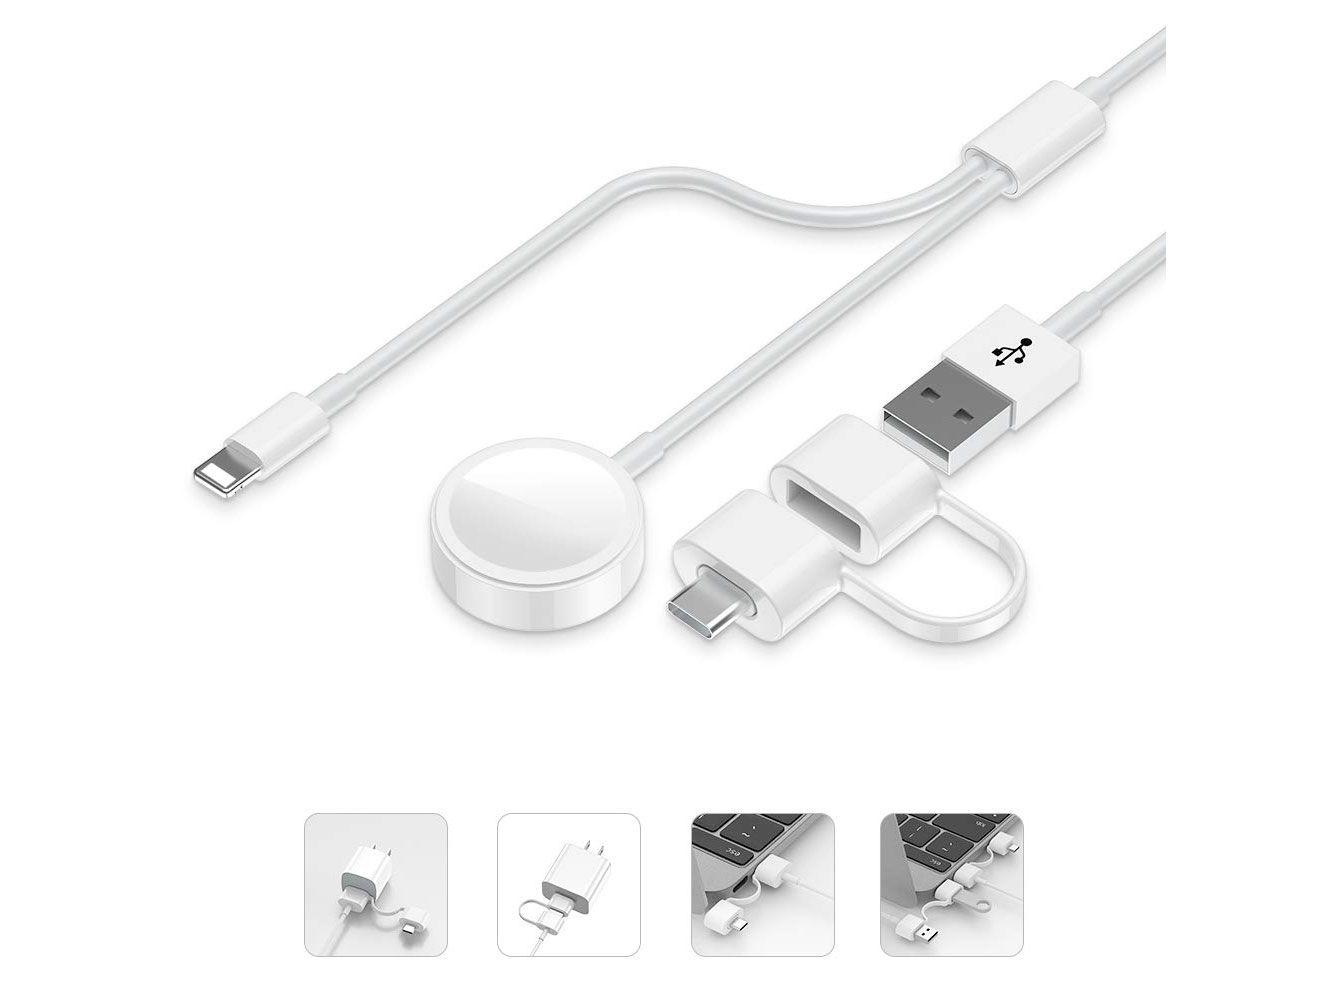 Amazon：USB A/TYPE C 2-in-1 Charing Cable and Wireless Charger只賣$10.10